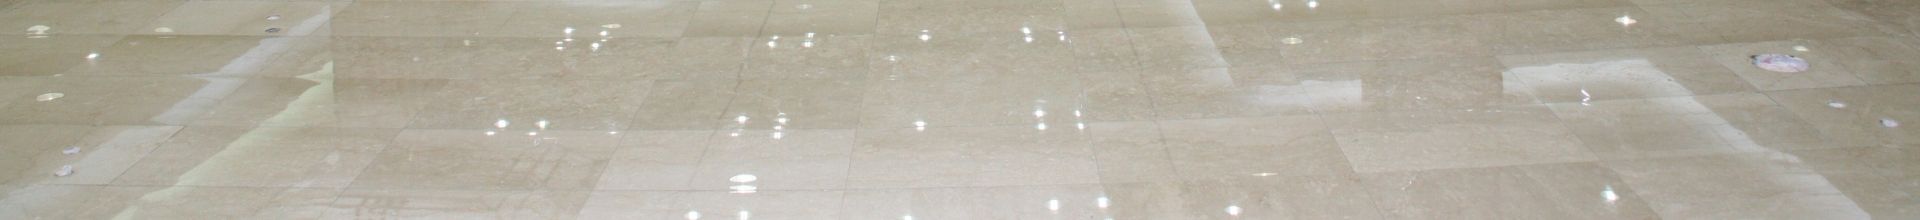 polished marble floor in a hotel